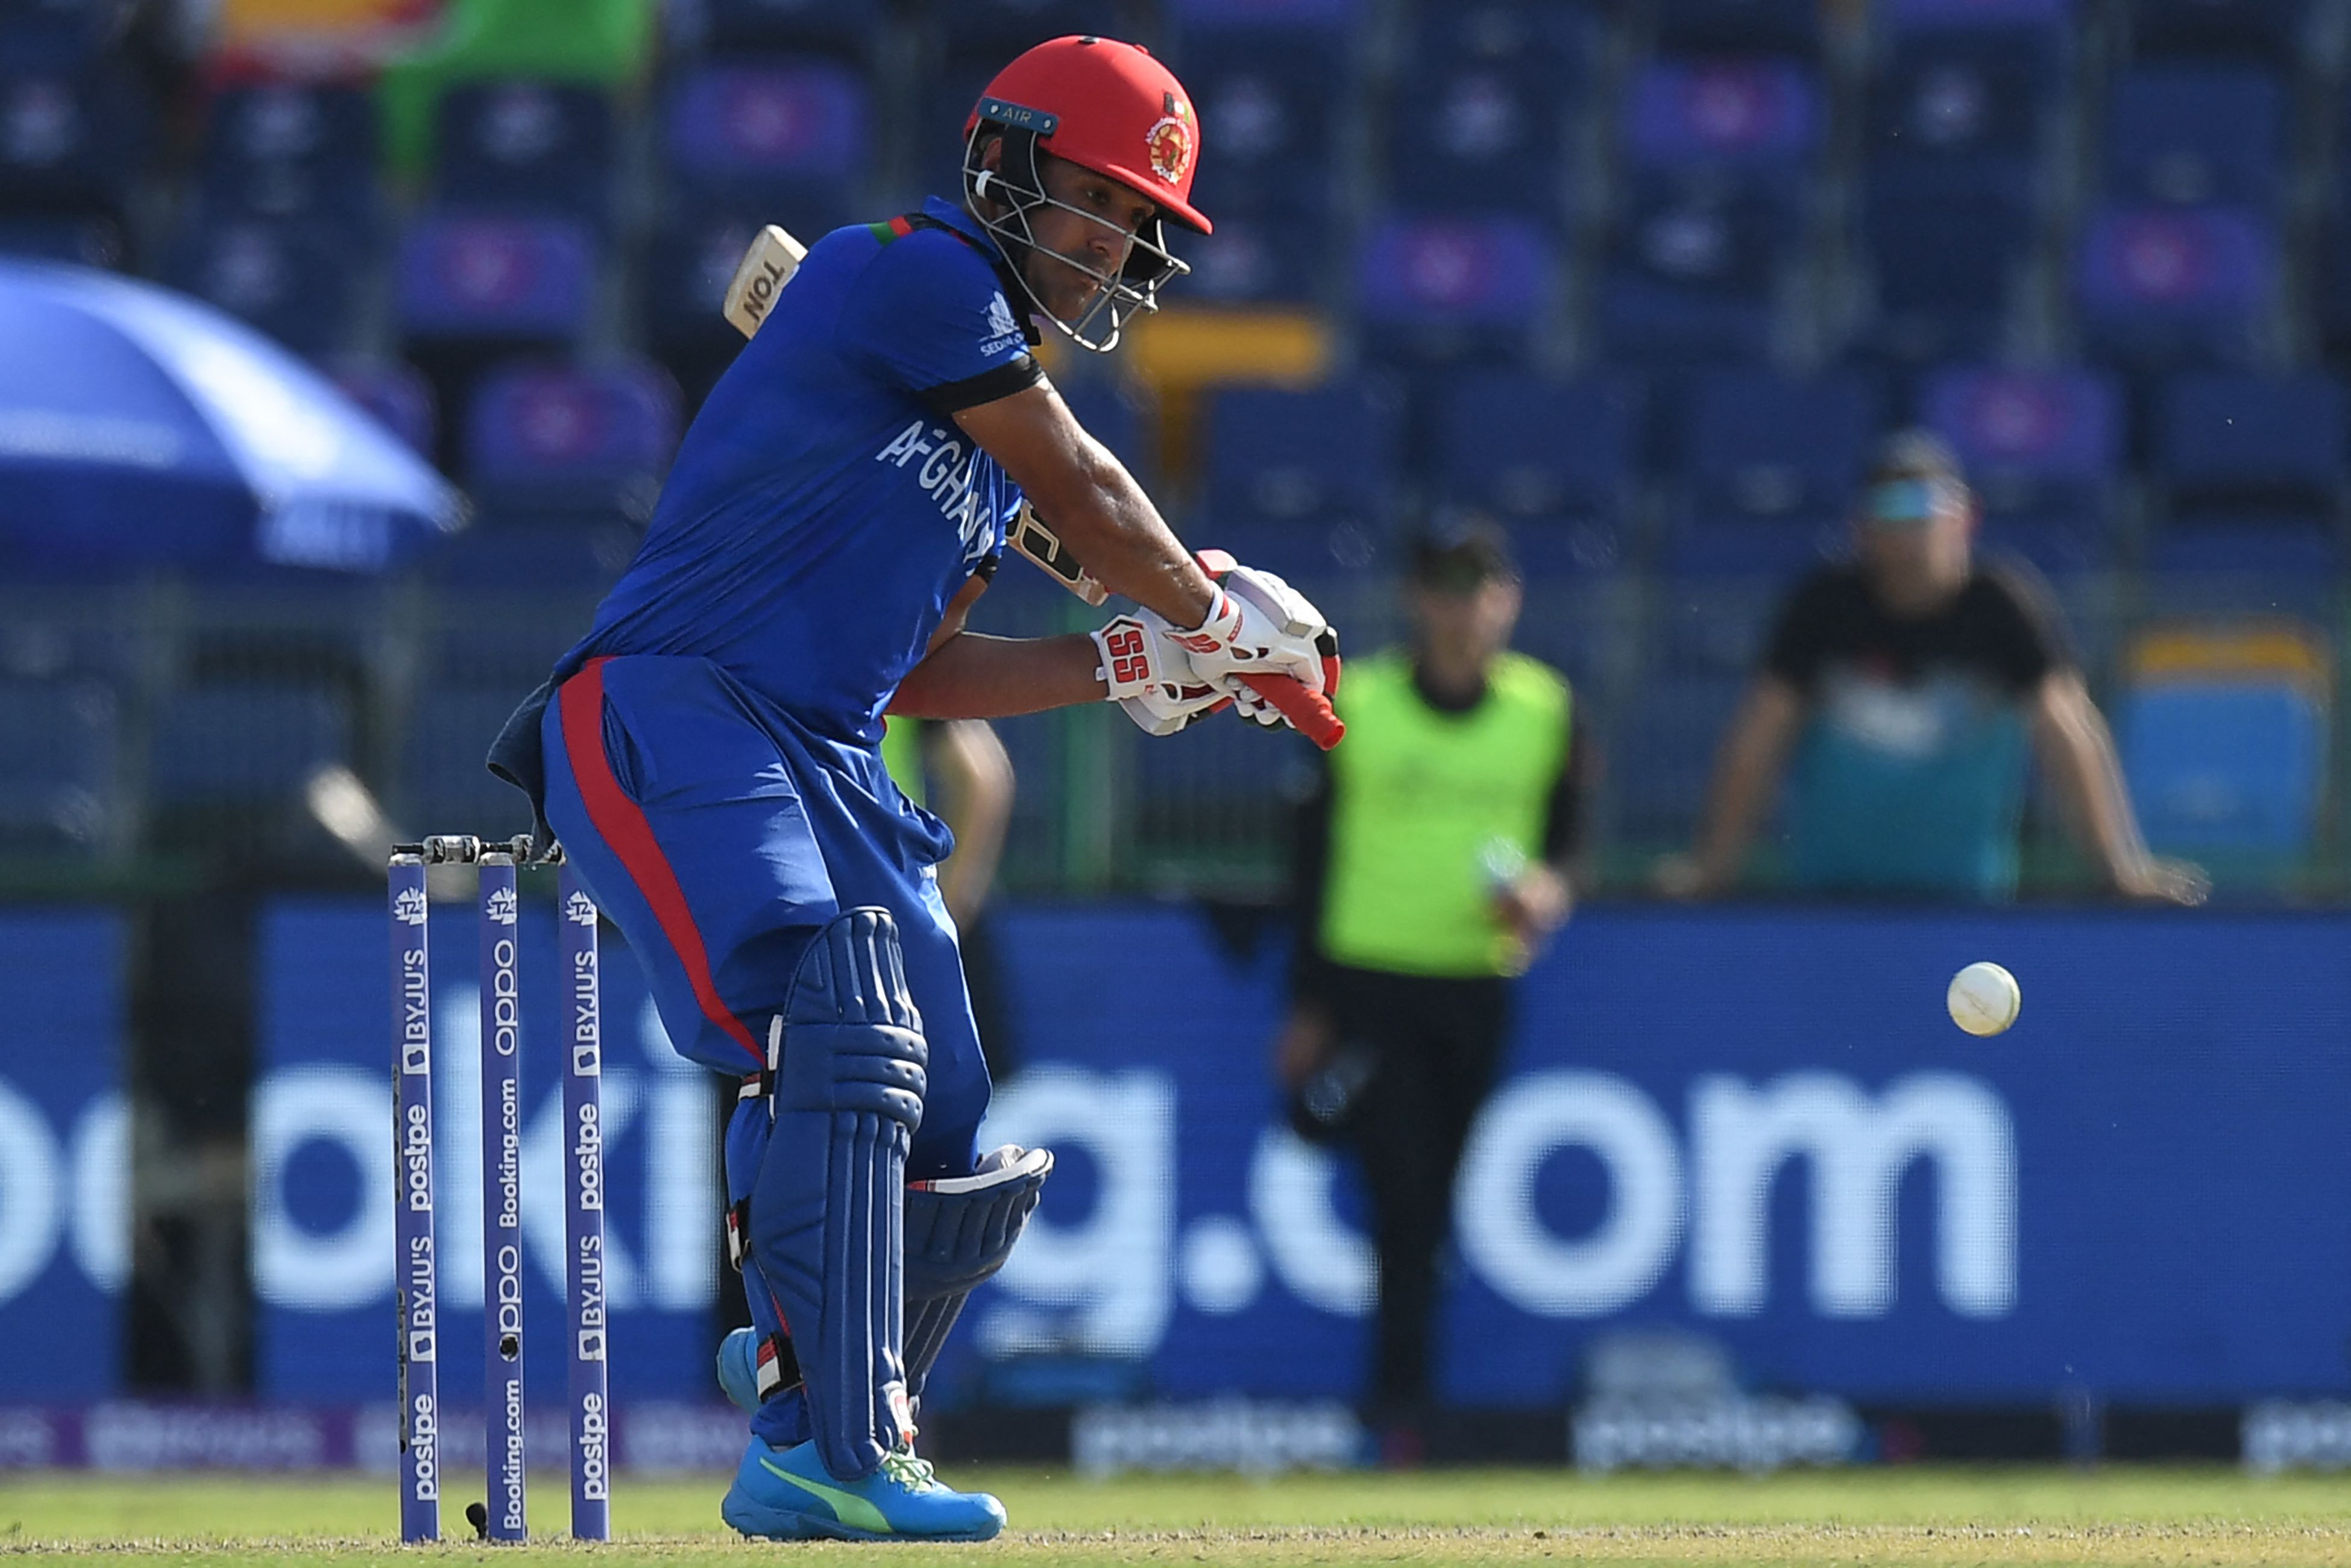 T20 World Cup 2021 | IPL contract is just around the corner for Najibullah Zadran, feels Virender Sehwag